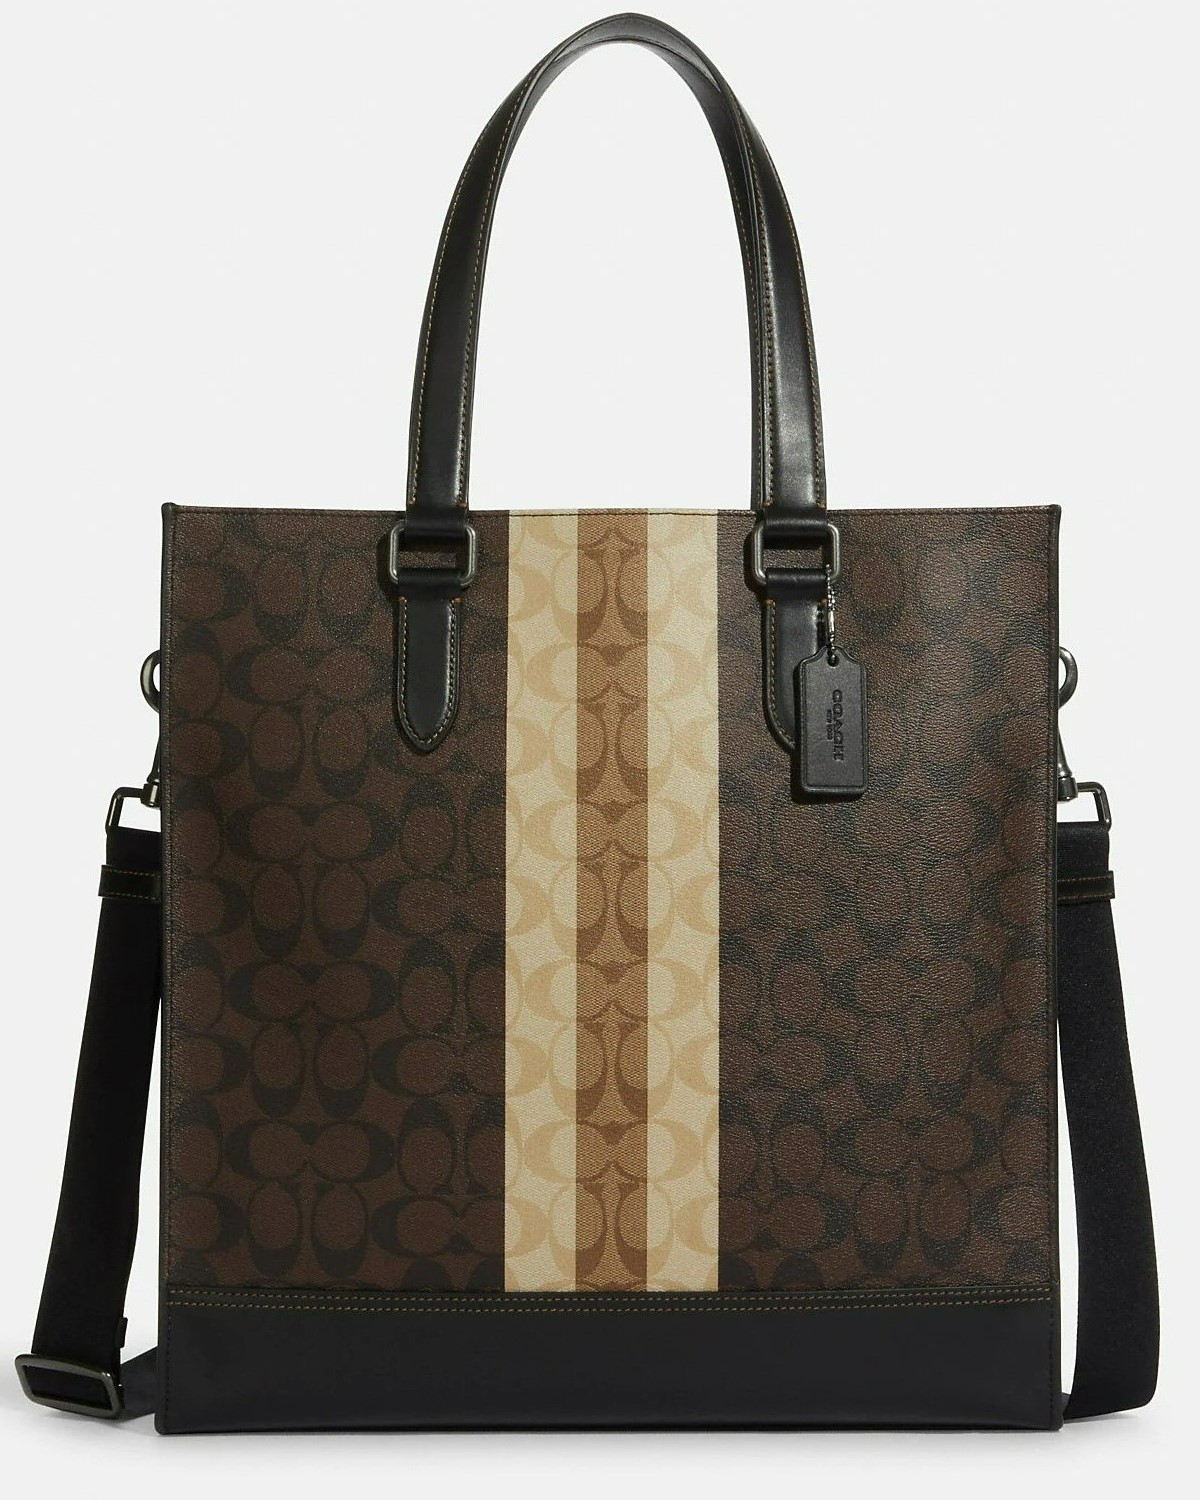 TÚI XÁCH COACH GRAHAM STRUCTURED TOTE IN BLOCKED SIGNATURE CANVAS WITH VARSITY STRIPE 7